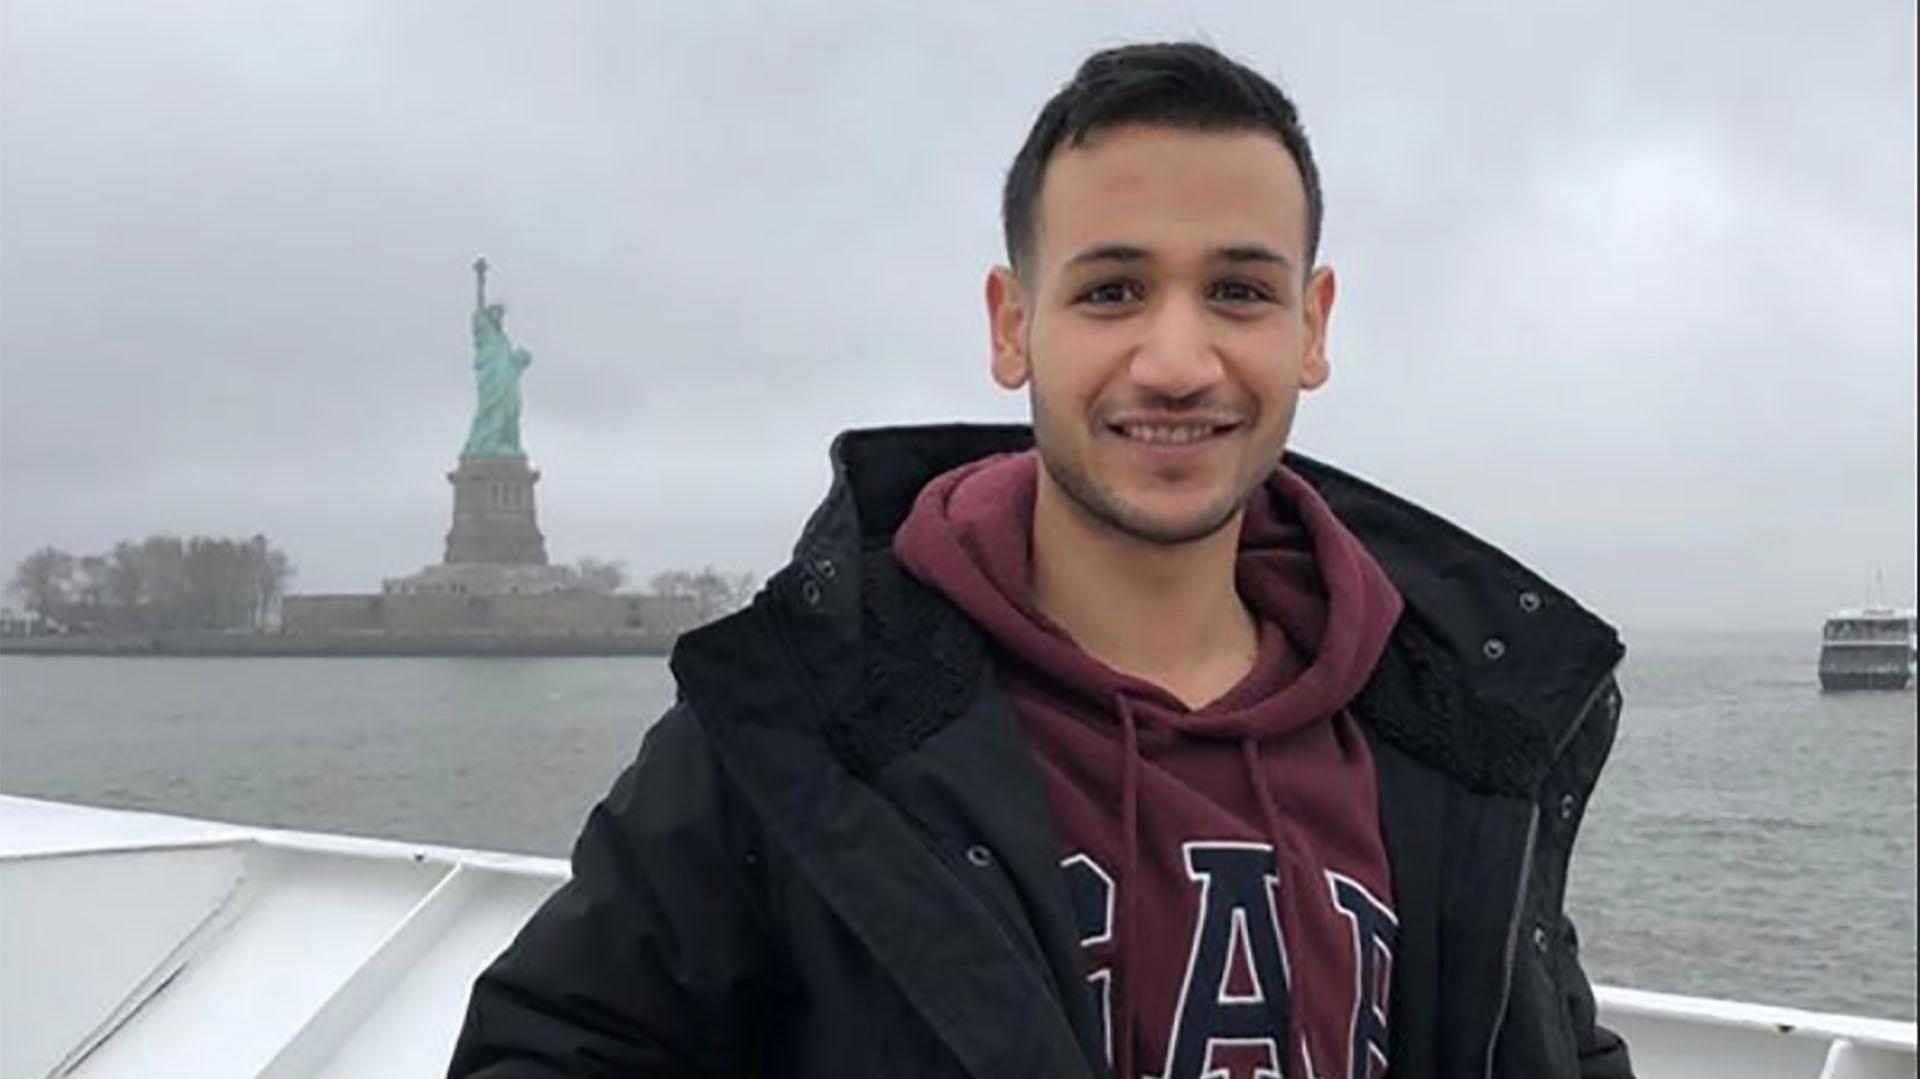 Fares Malahi posing in front of the Statue of Liberty.